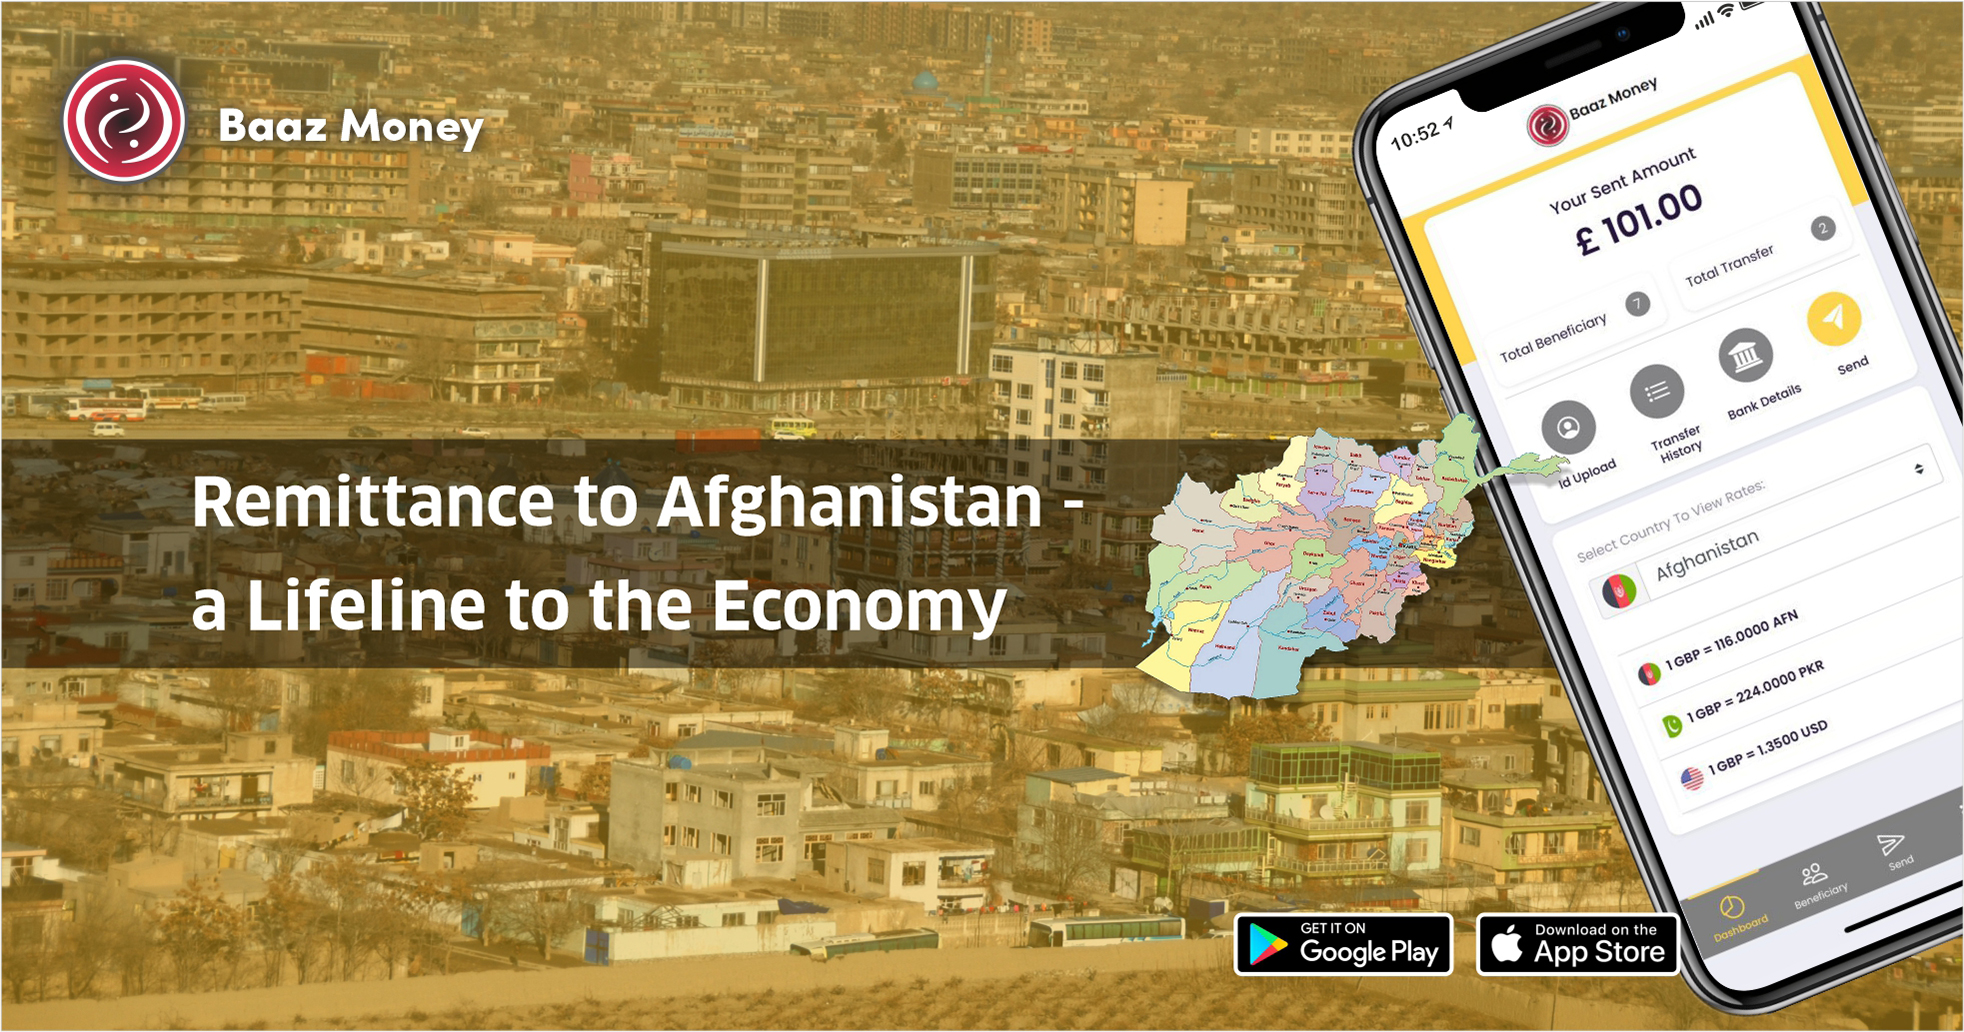 Remittance to Afghanistan - a Lifeline to the Economy